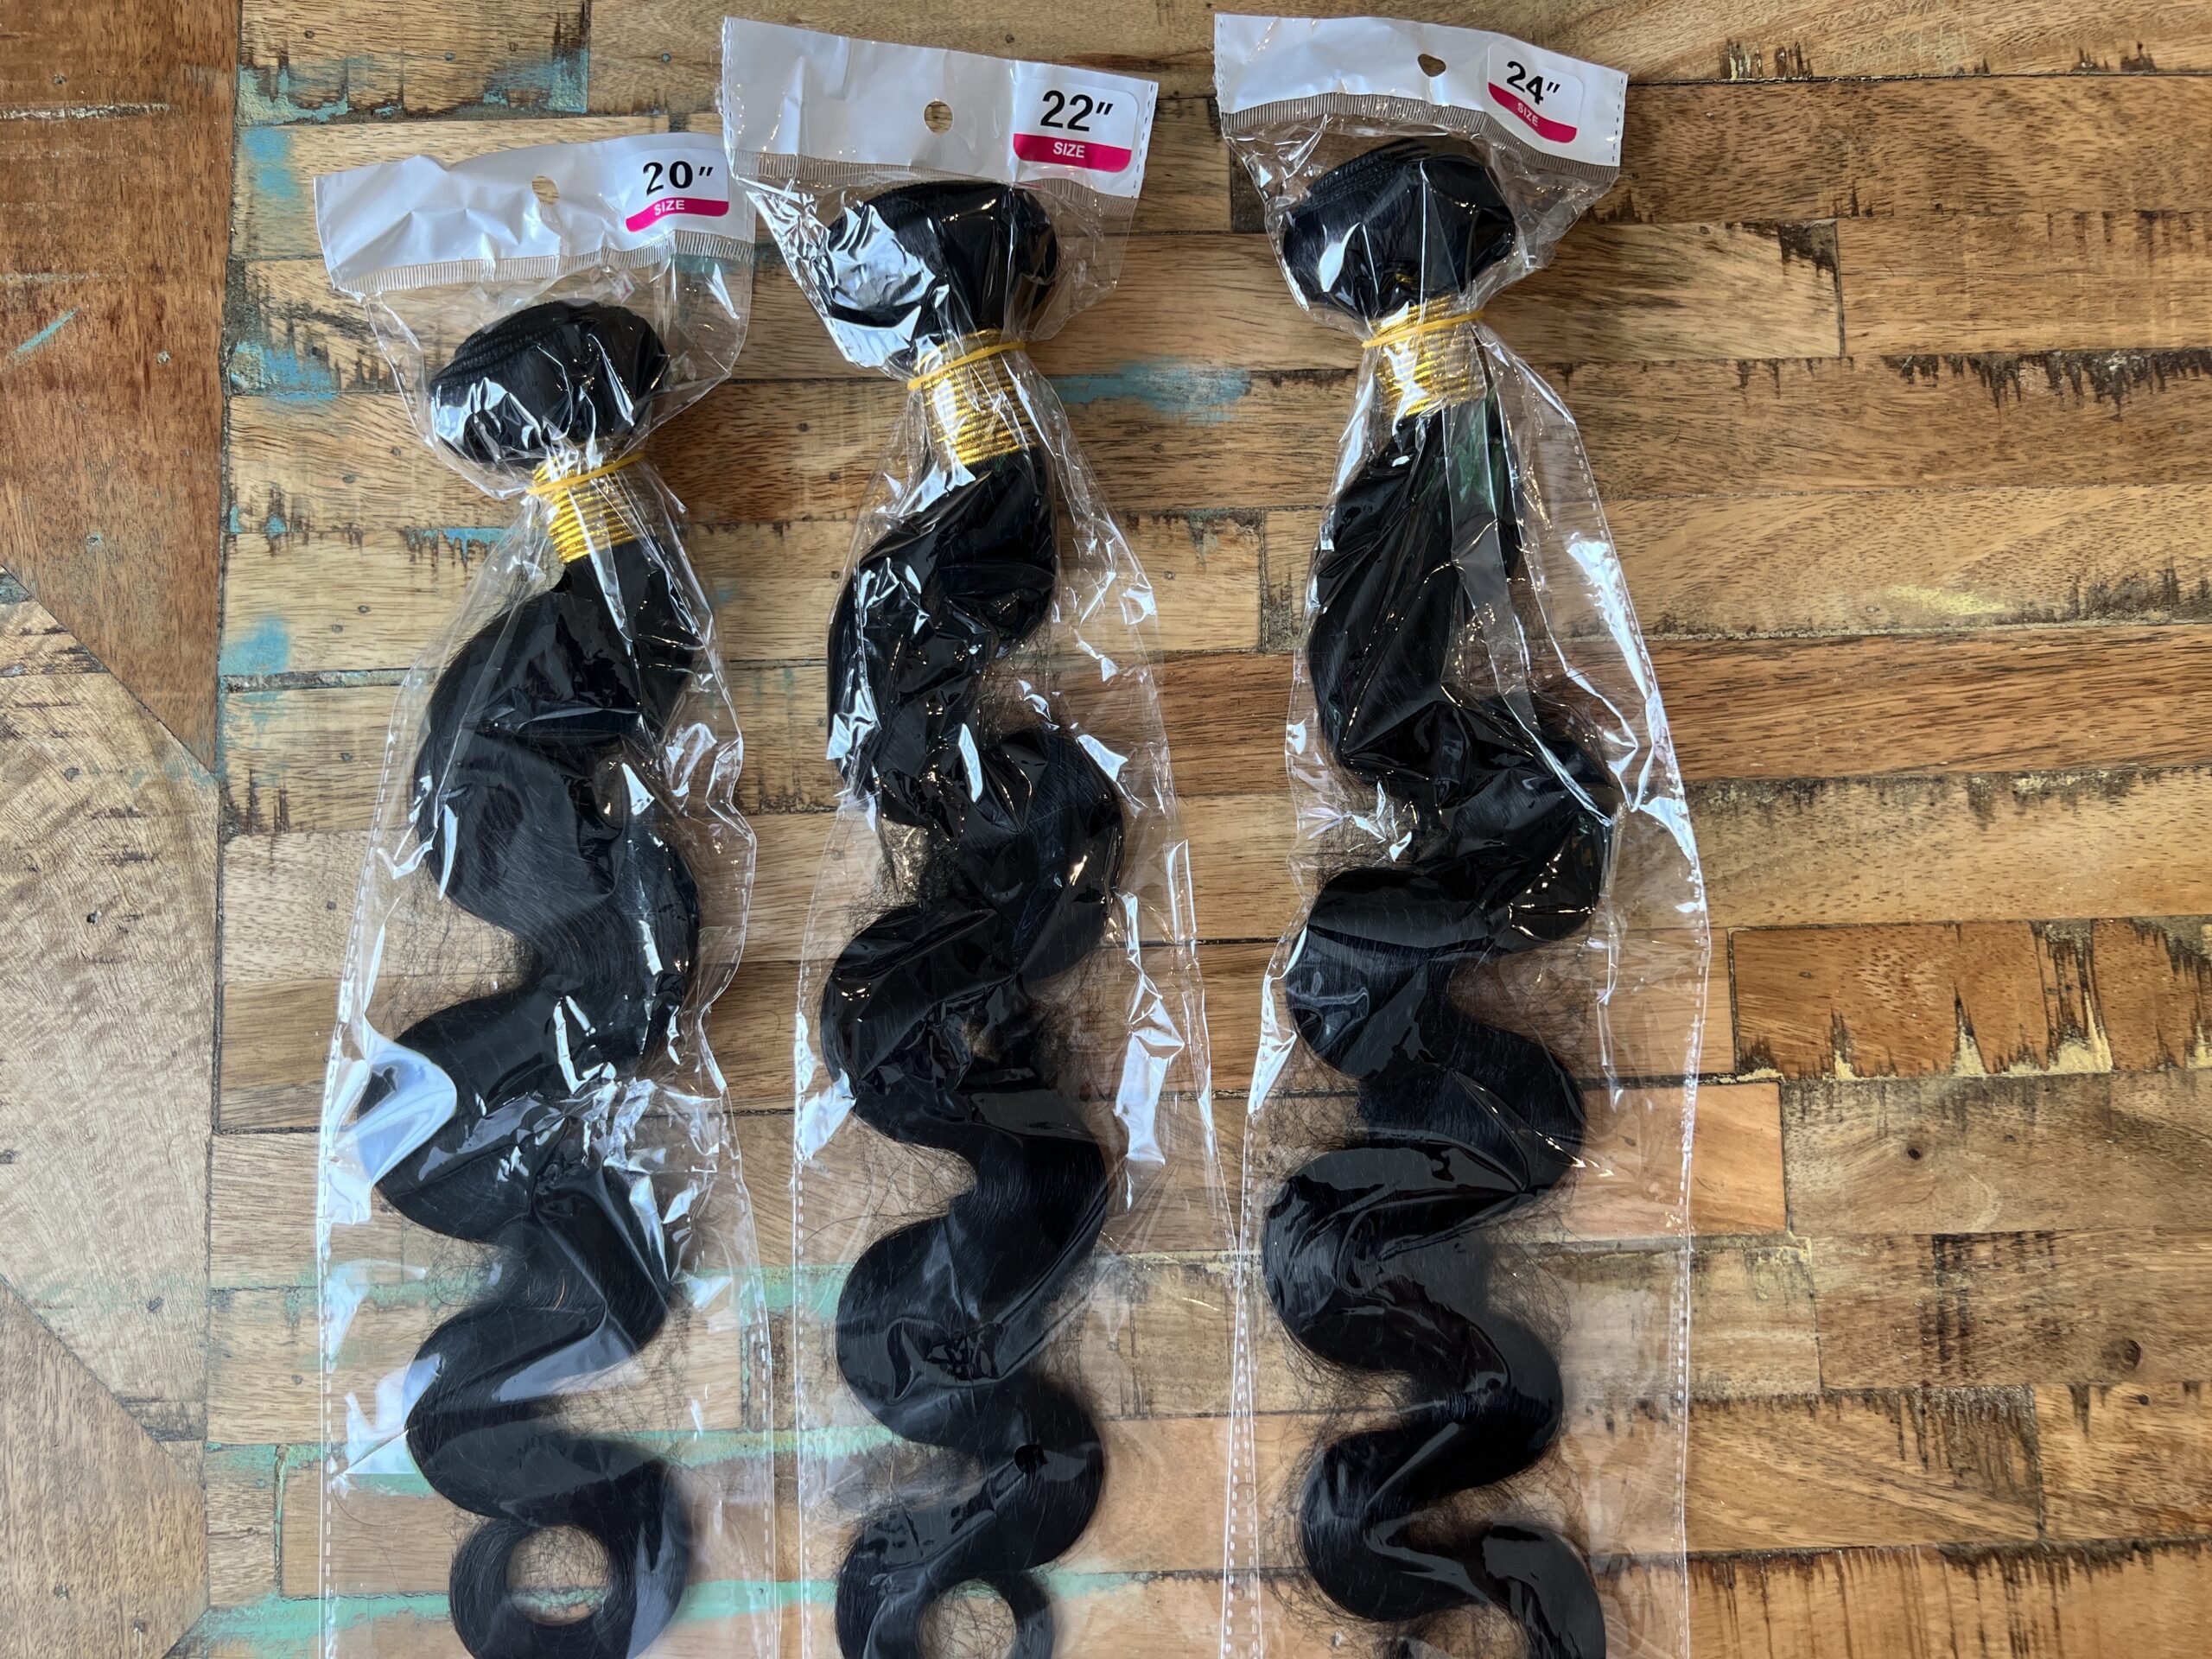 VADES Body Wave Bundles arrived in three different lengths: 20 inches, 22 inches, and 24 inches. As you can see, each length is packaged separately and clearly labeled. 